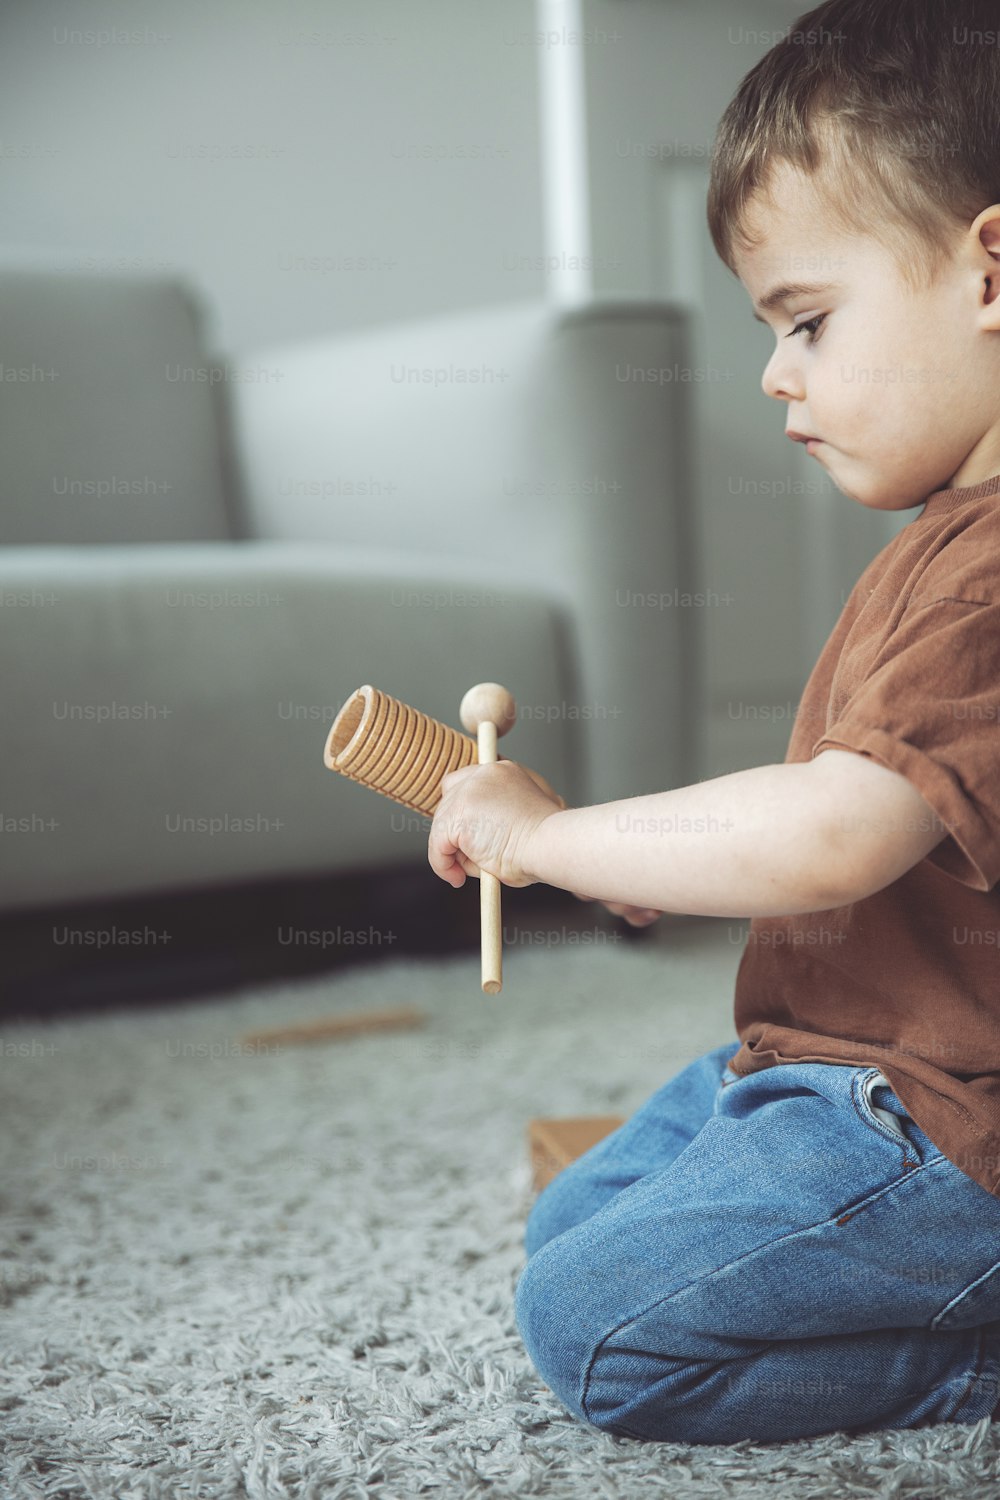 a young boy sitting on the floor playing with a toy